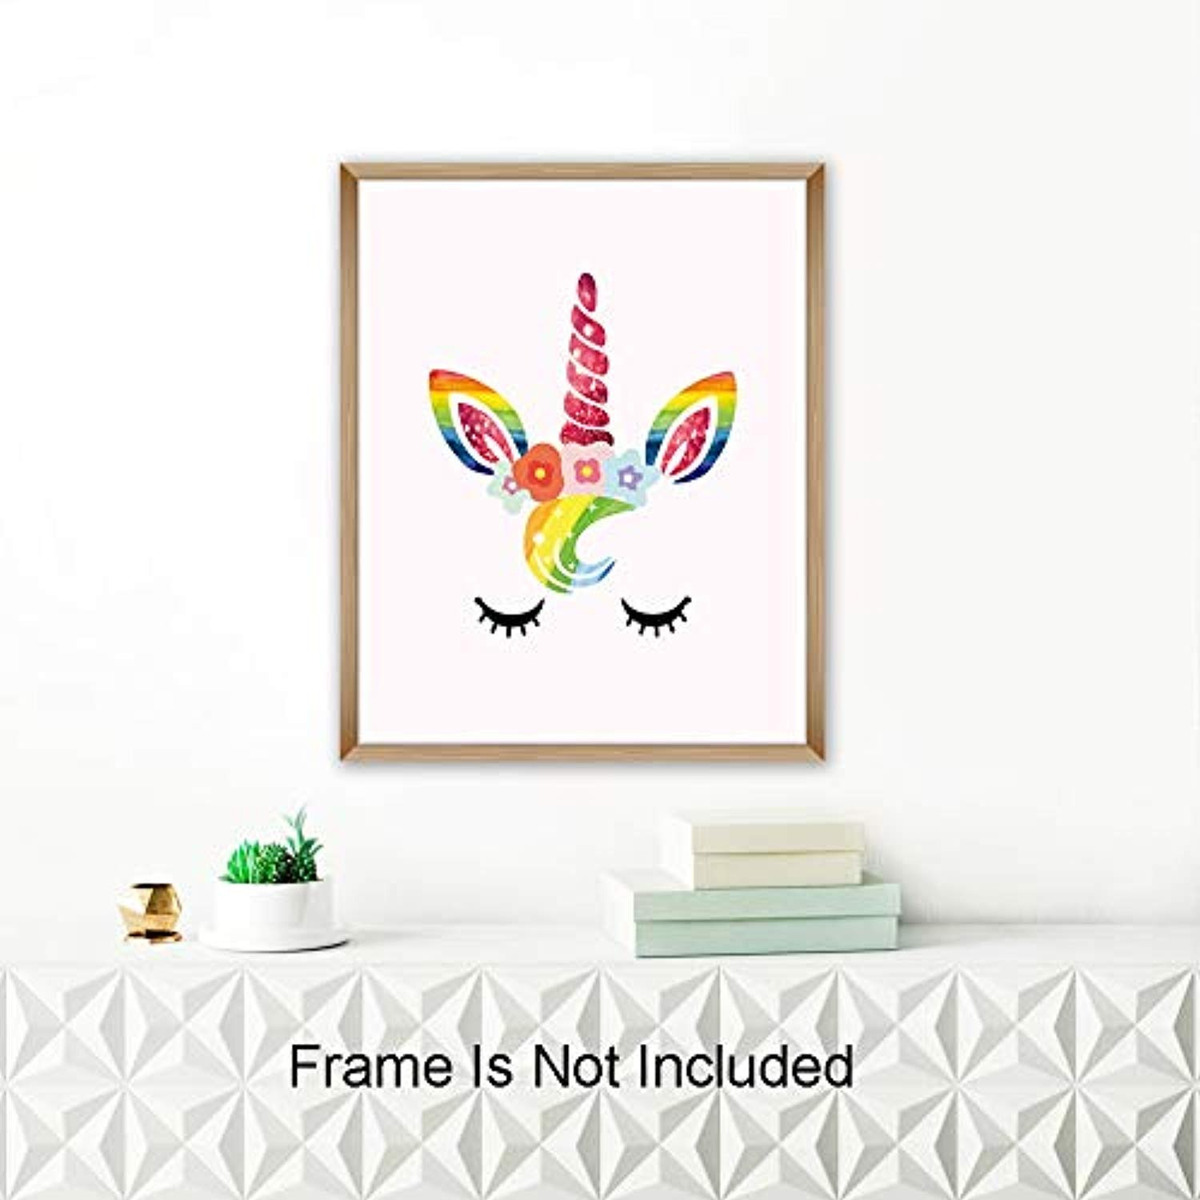 10X8Rainbow Art Painting Unicorn Gift Kids Room Decor,Canvas Painting Posters Prints Wall Pictures Kids Room Home Decor,No Frame Colorful Unicorn Art Print Set of 3